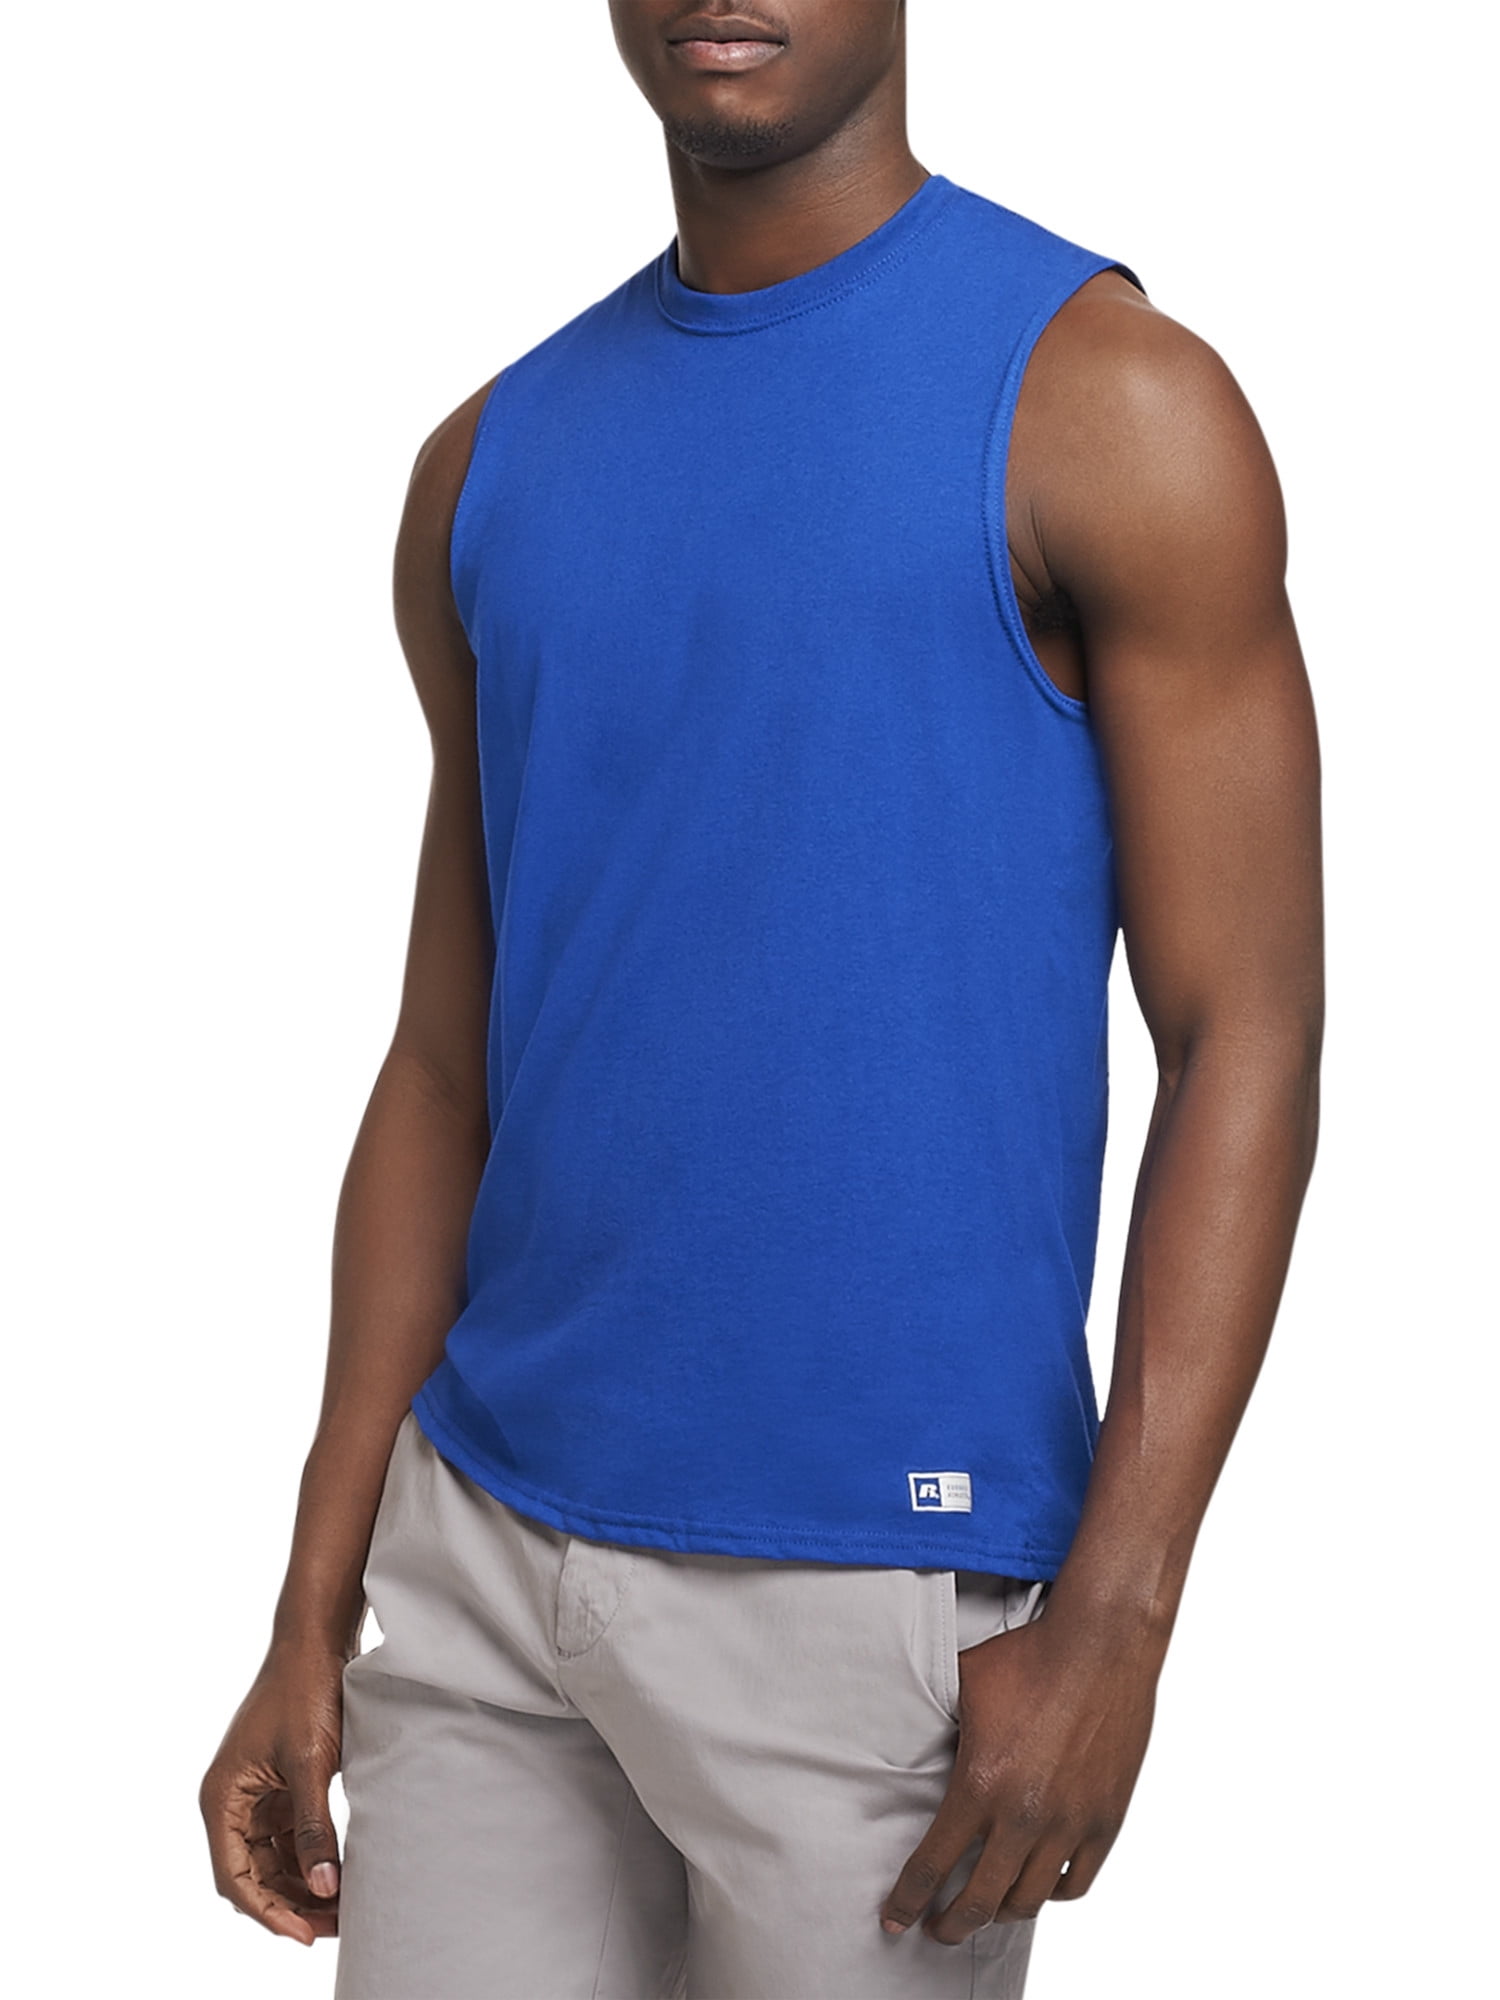 Russell Athletic - Russell Athletic Men's Essential Breathable Cotton ...